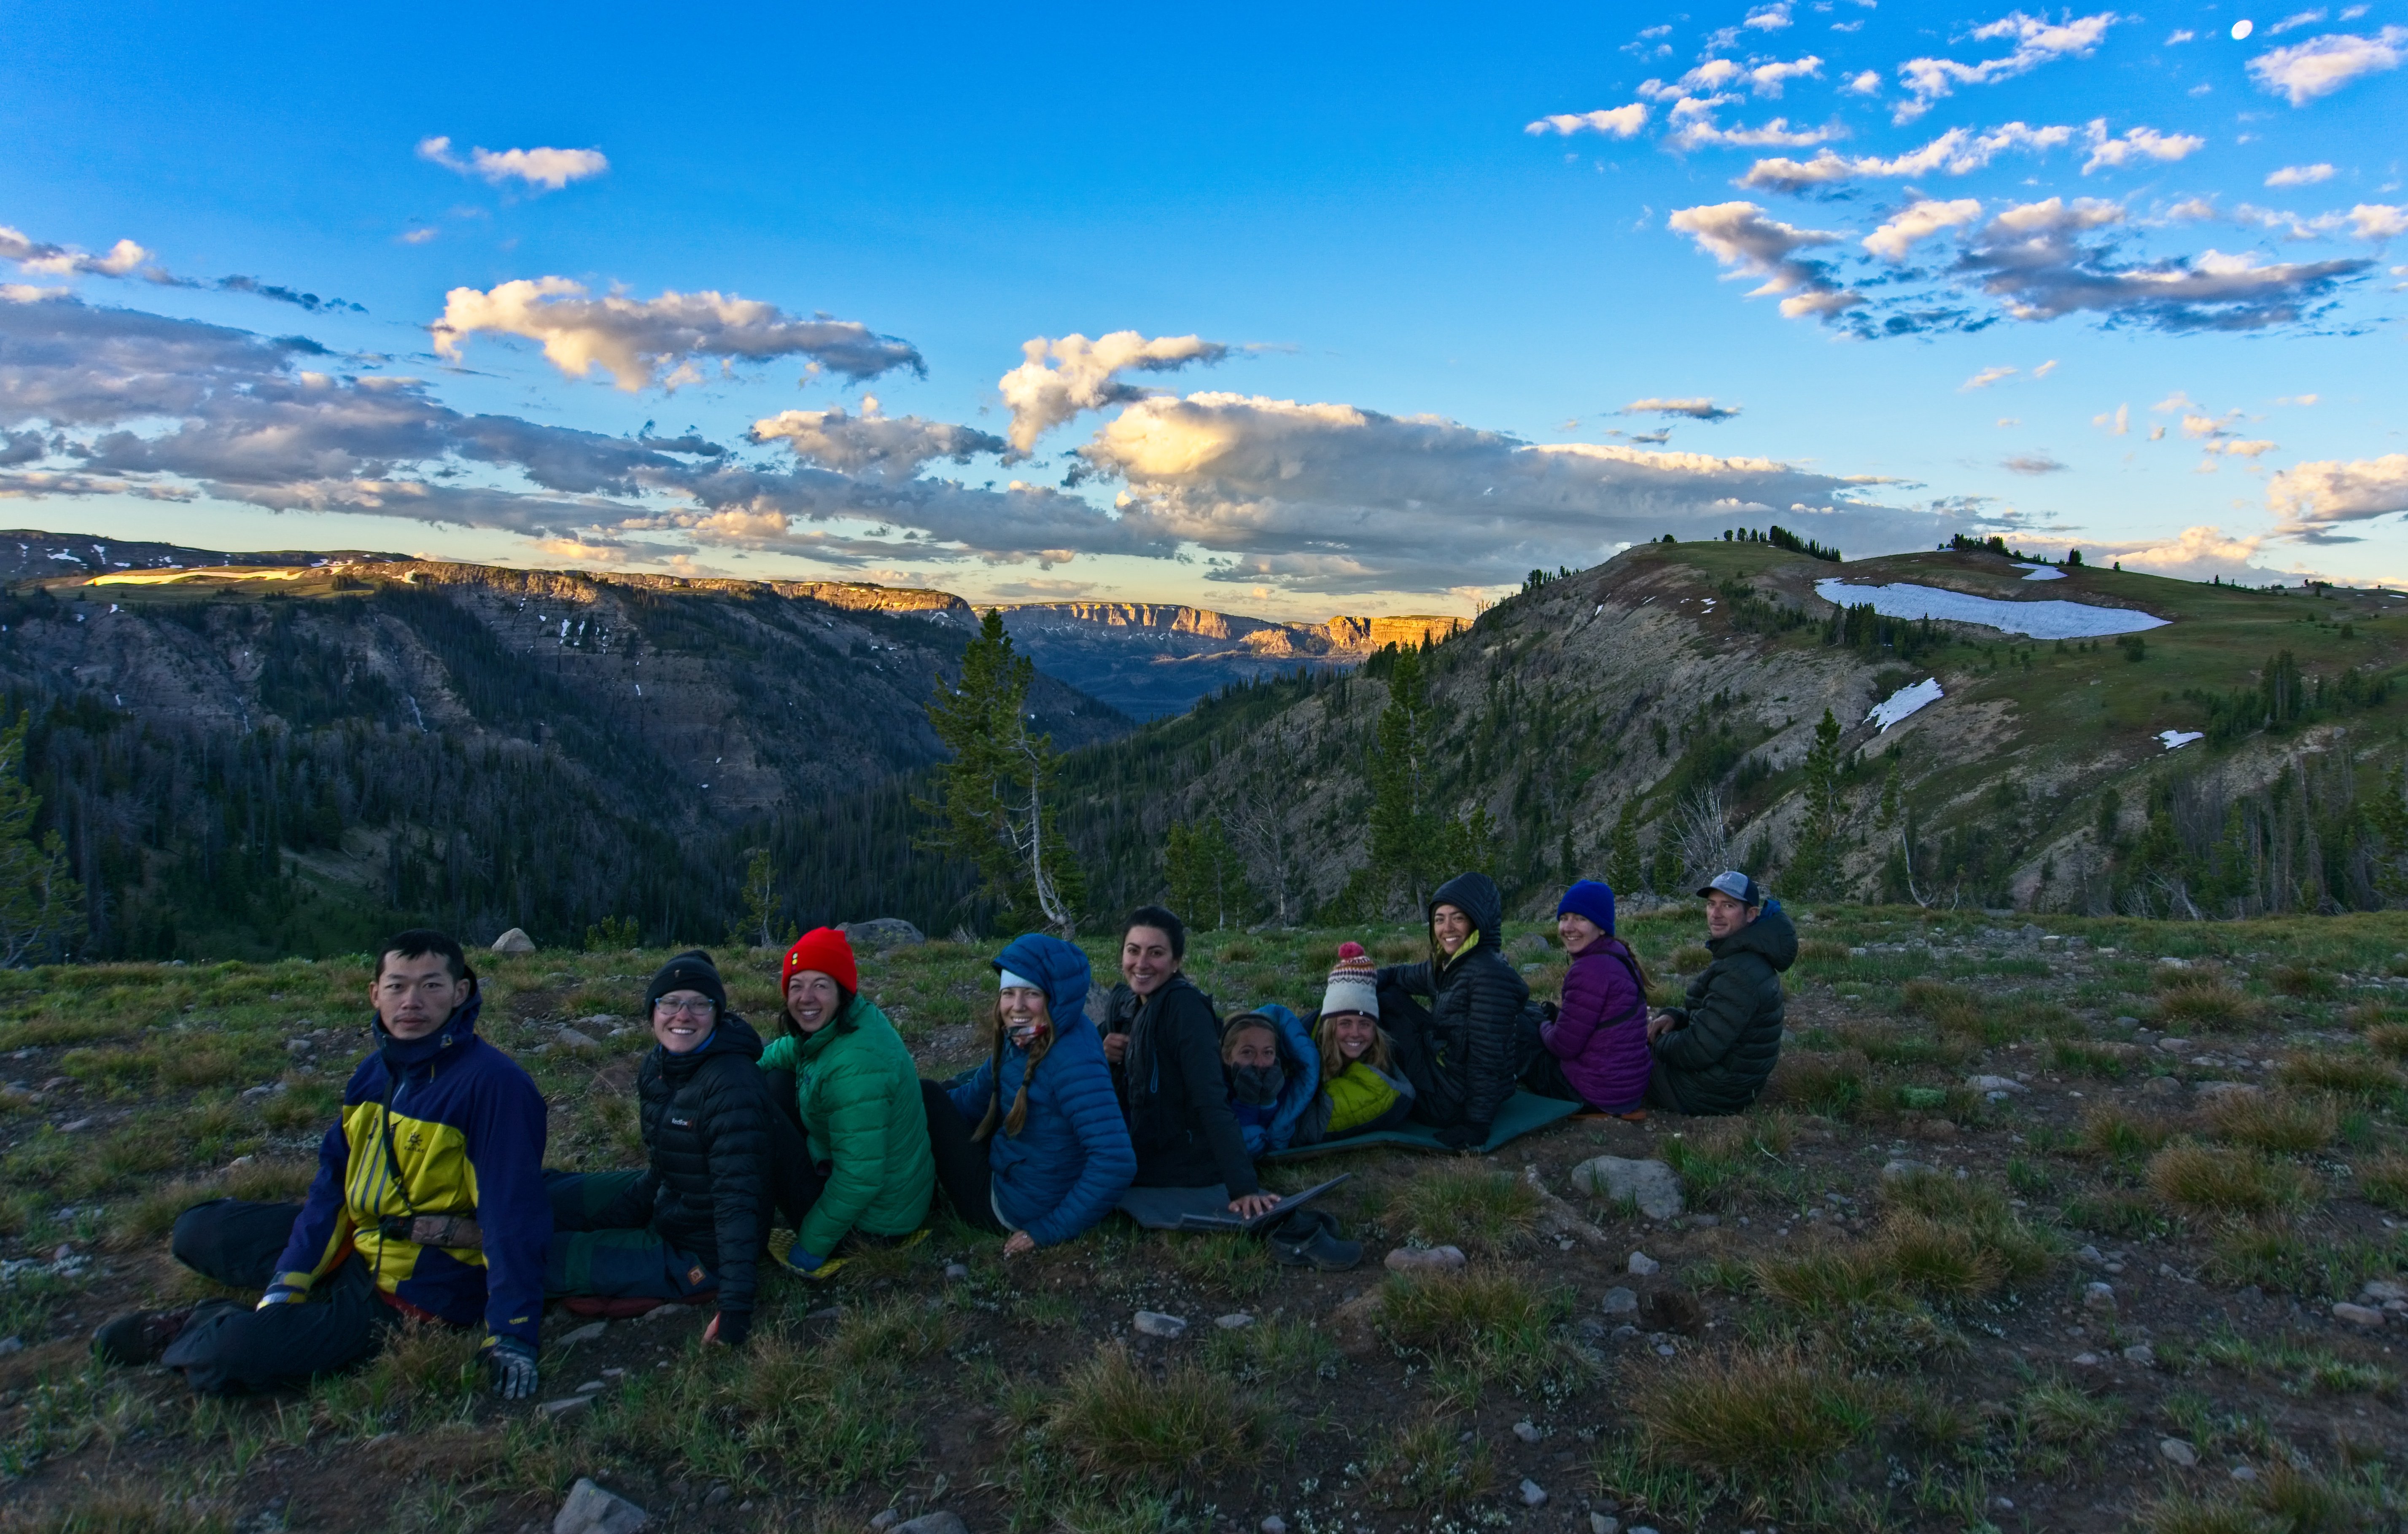 ten students sit in a line in the mountains at sunset